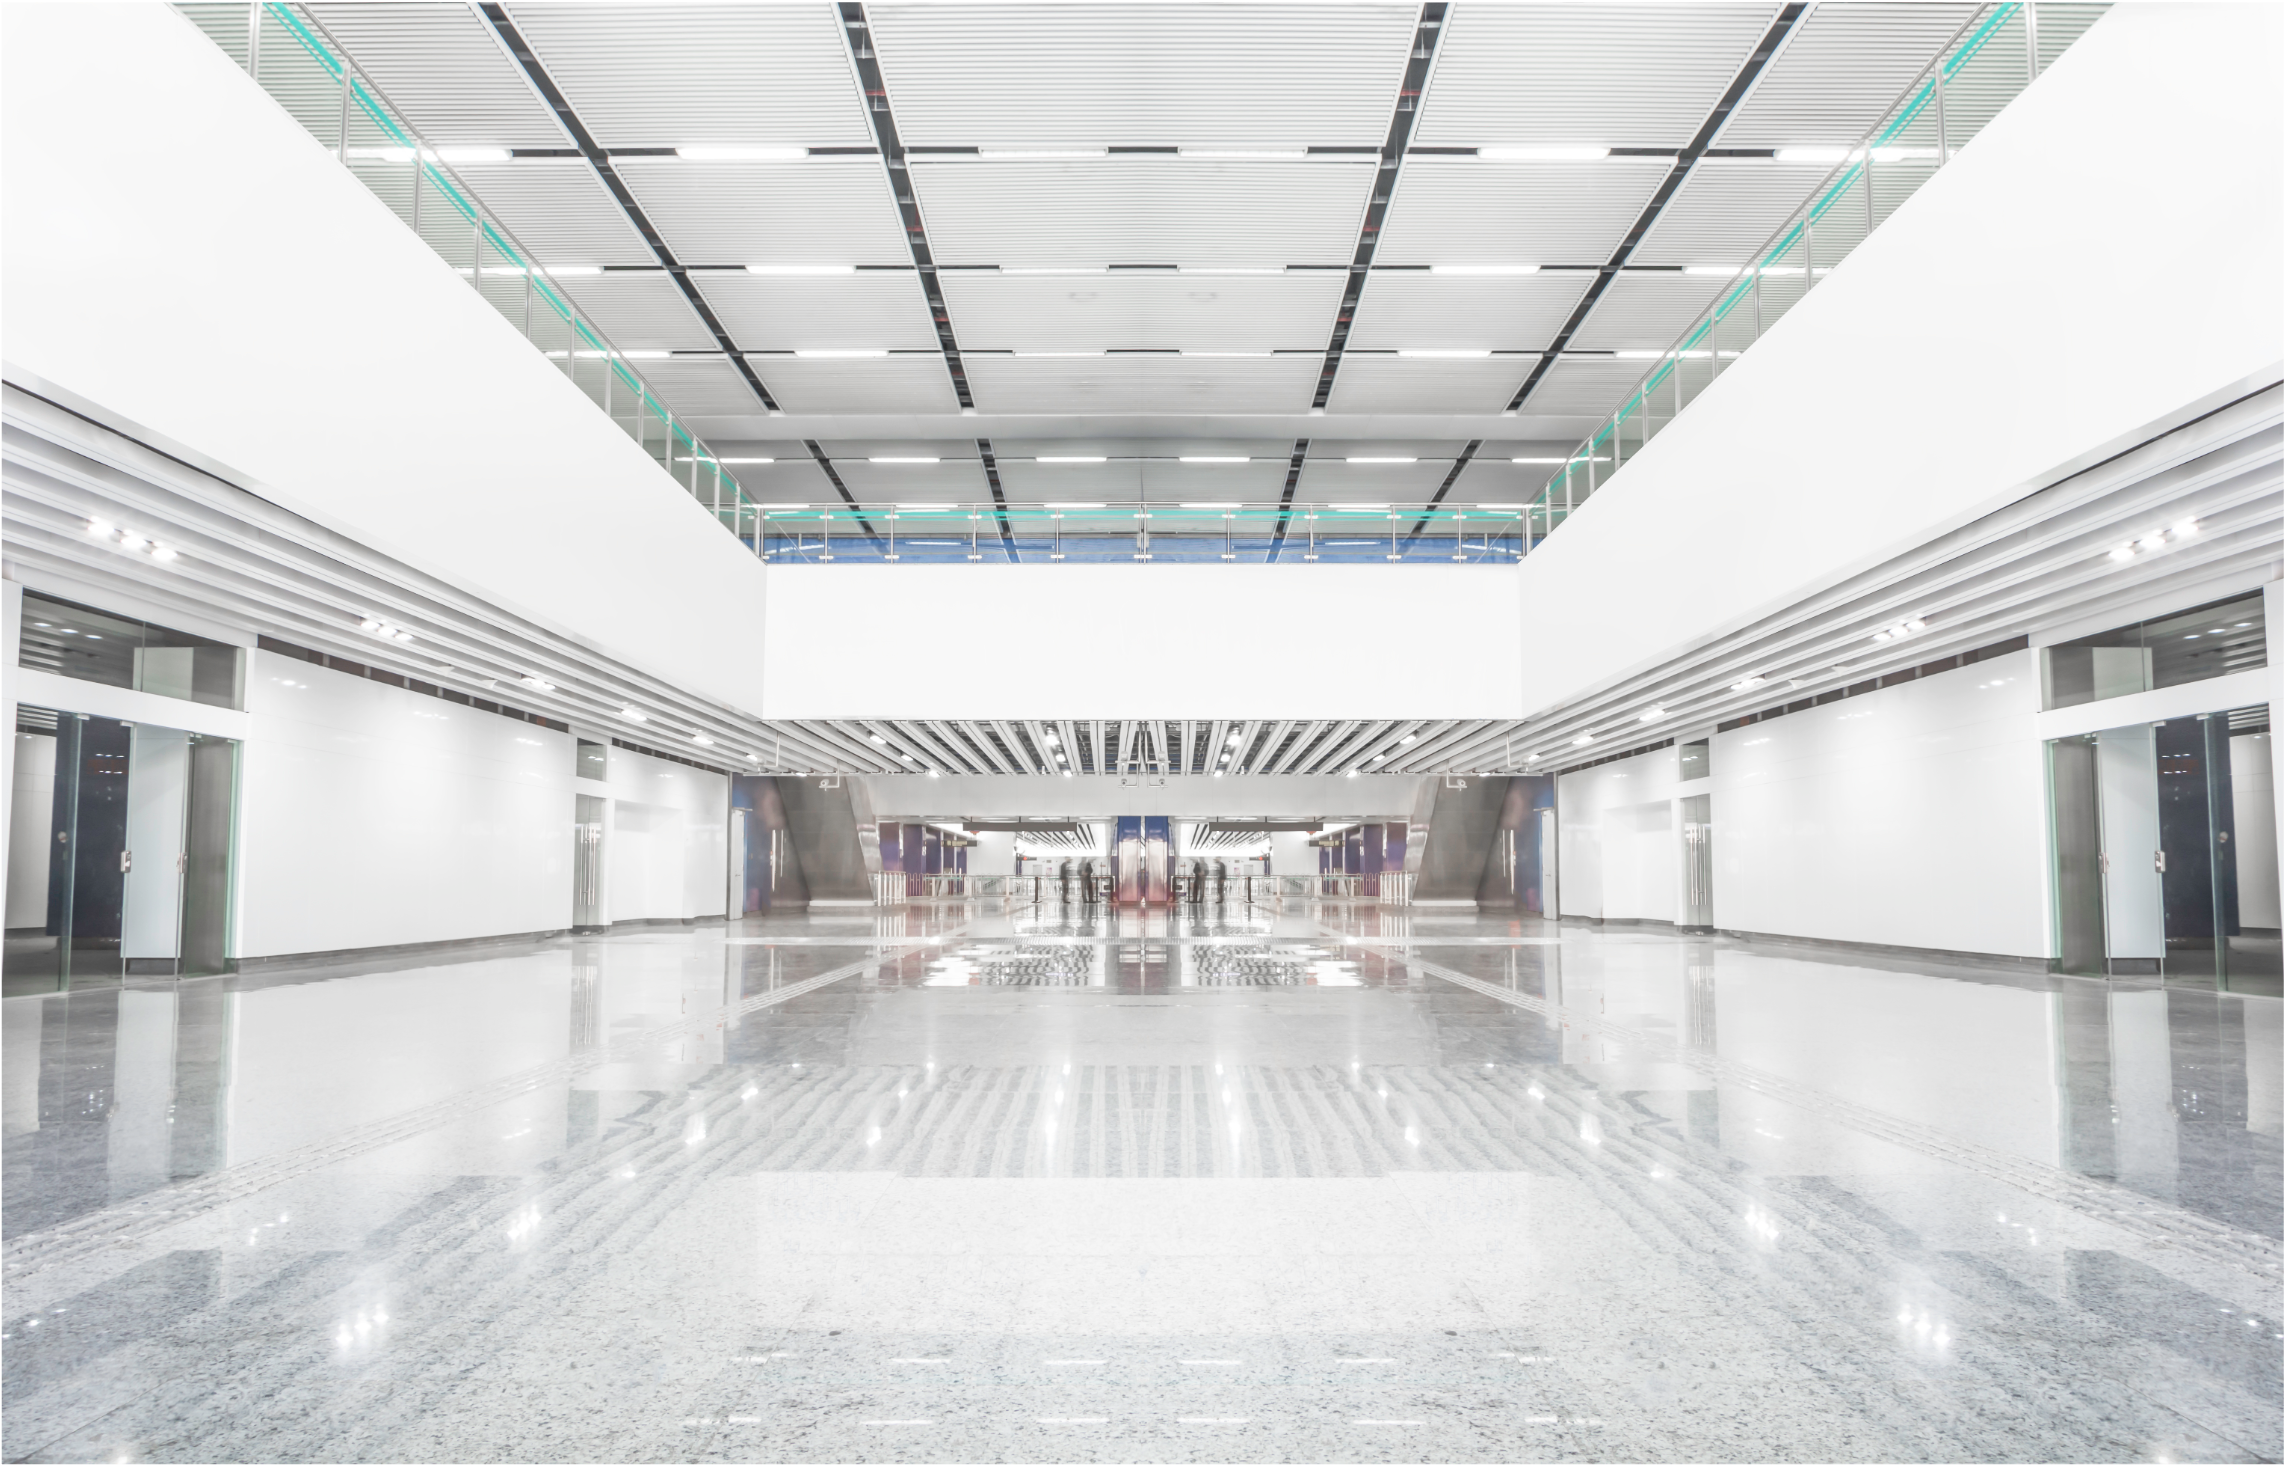 The Benefits of Commercial Lighting Control Systems